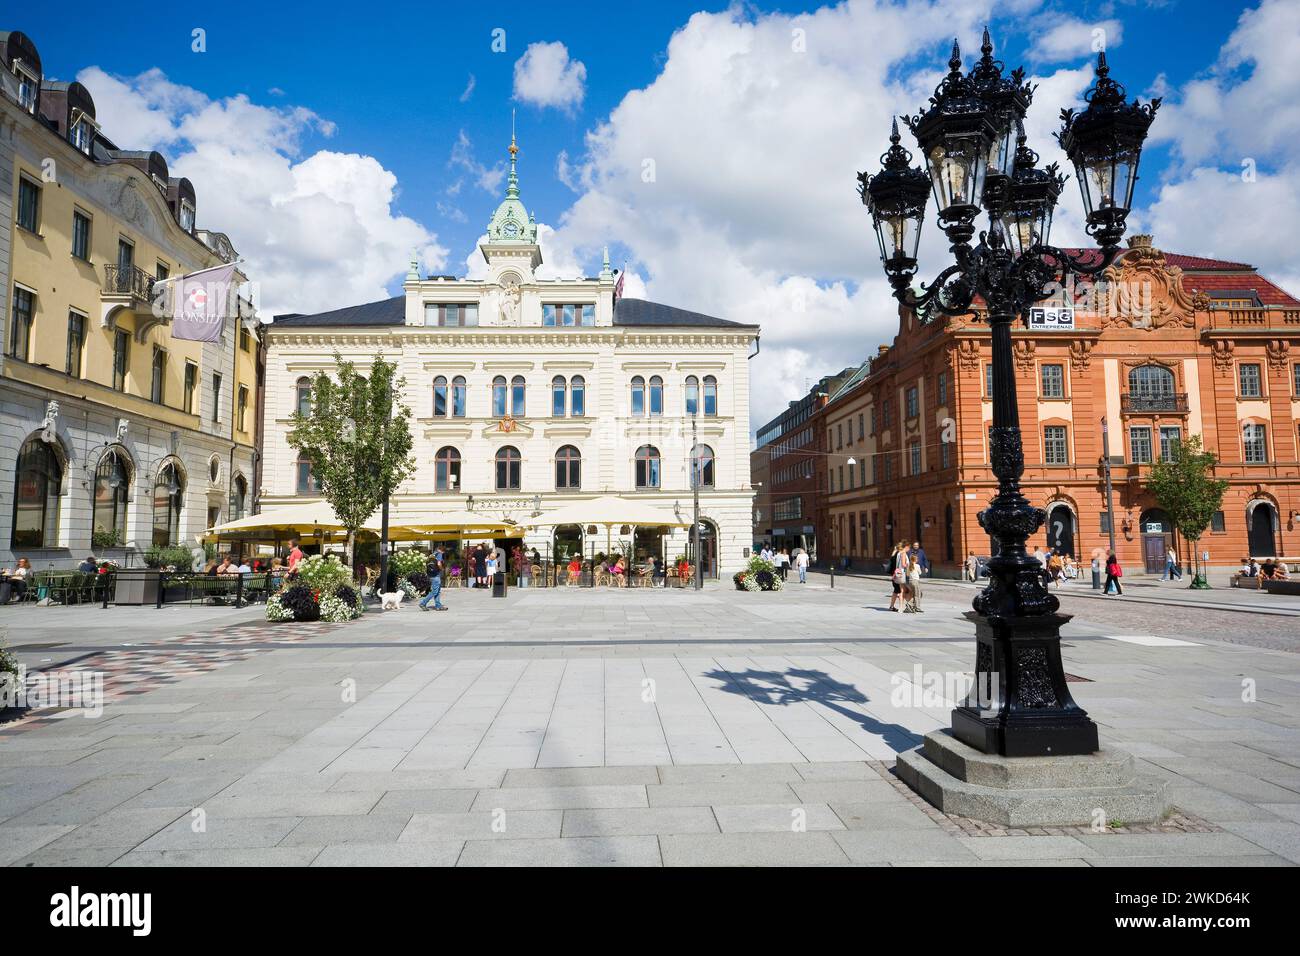 Historic building of Rådhuset (Town Hall) at Stora Torget in Uppsala, Sweden Stock Photo